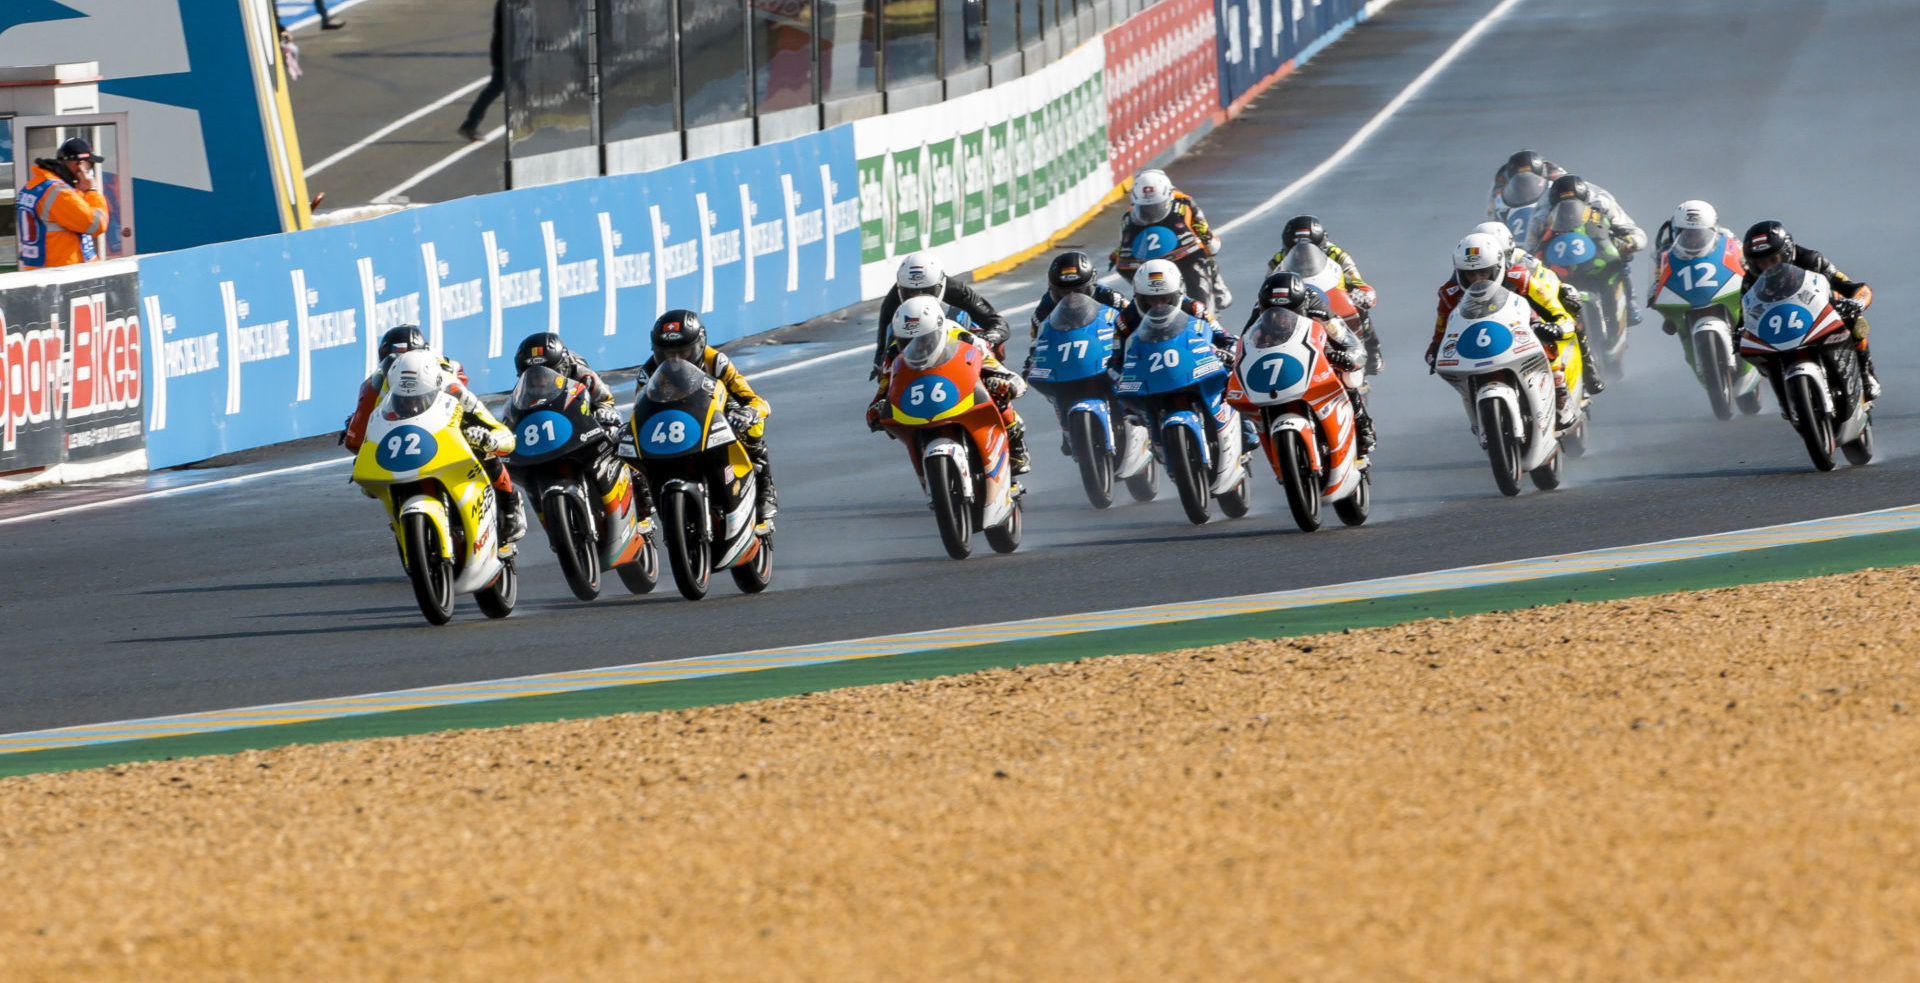 Hungarian-American Rossi Moor (92) leads the start of Northern Talent Cup Race One at Le Mans. Photo courtesy Dorna.